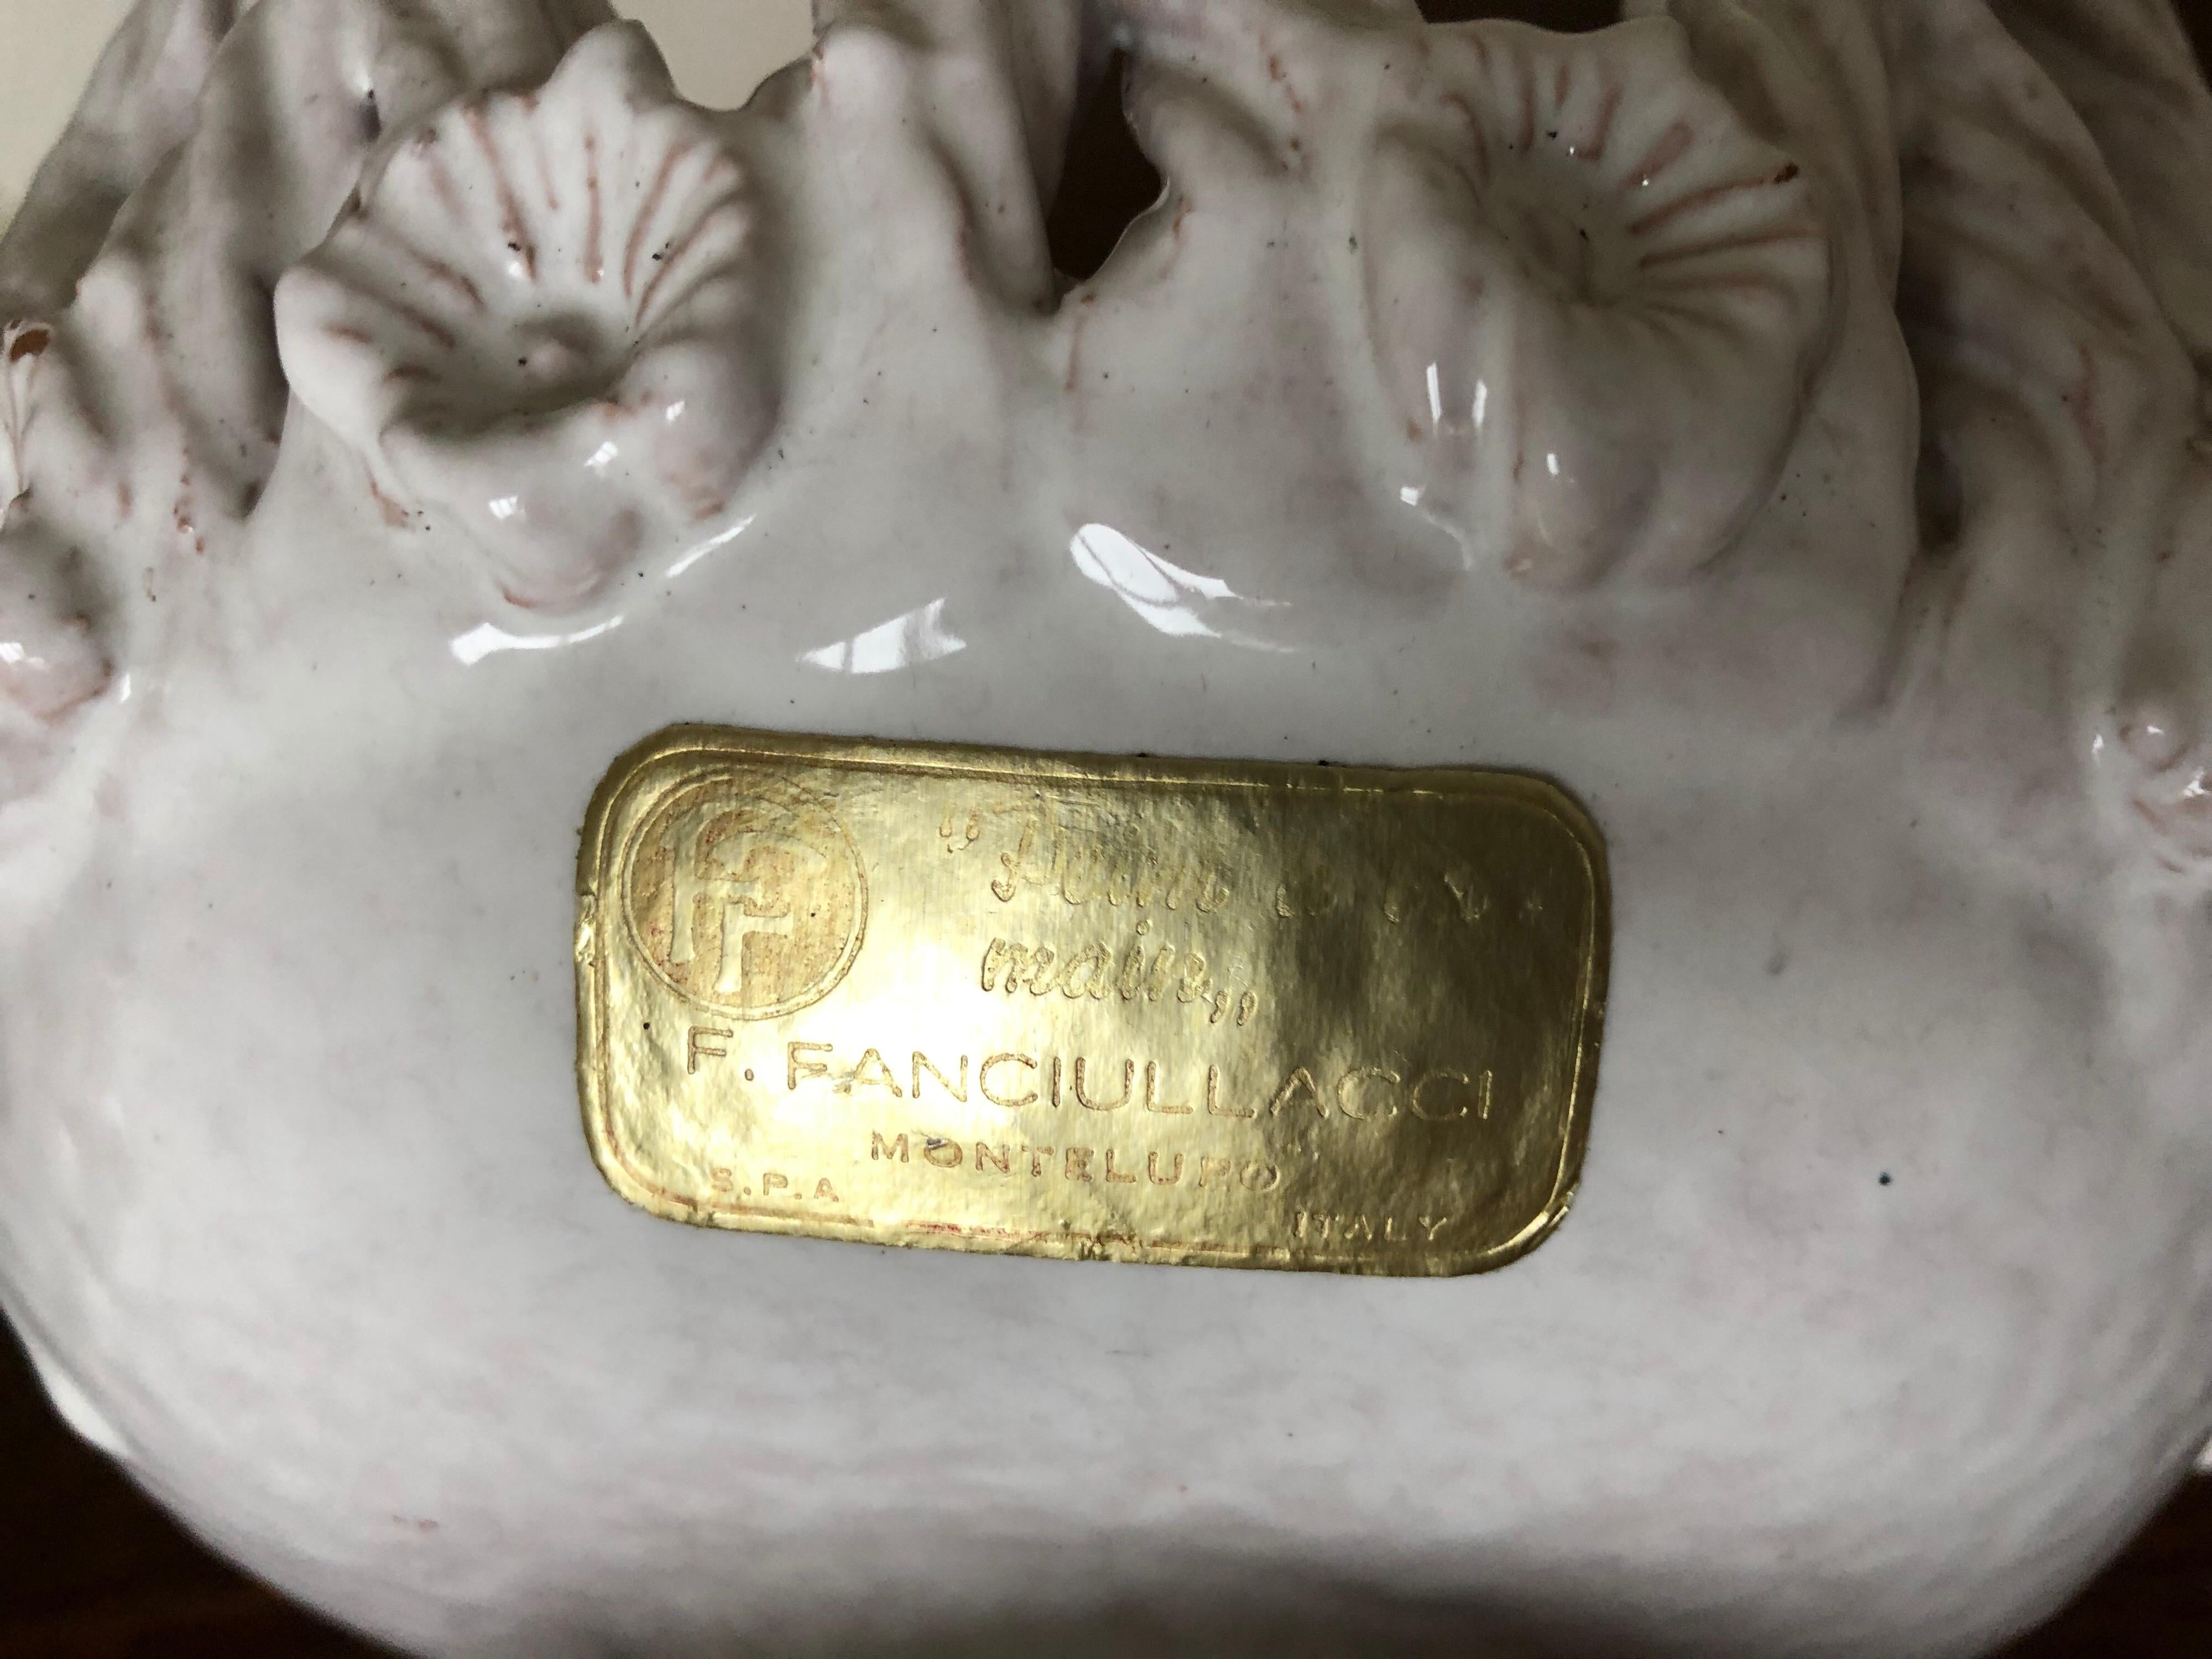 Fratelli Fanciullacci
The brothers Fanciullacci was prolific Italian pottery, who’s work is starting to become more widely known in the past few years, and is keenly sought amongst collectors.

As a style it is hard to pin down as there were so